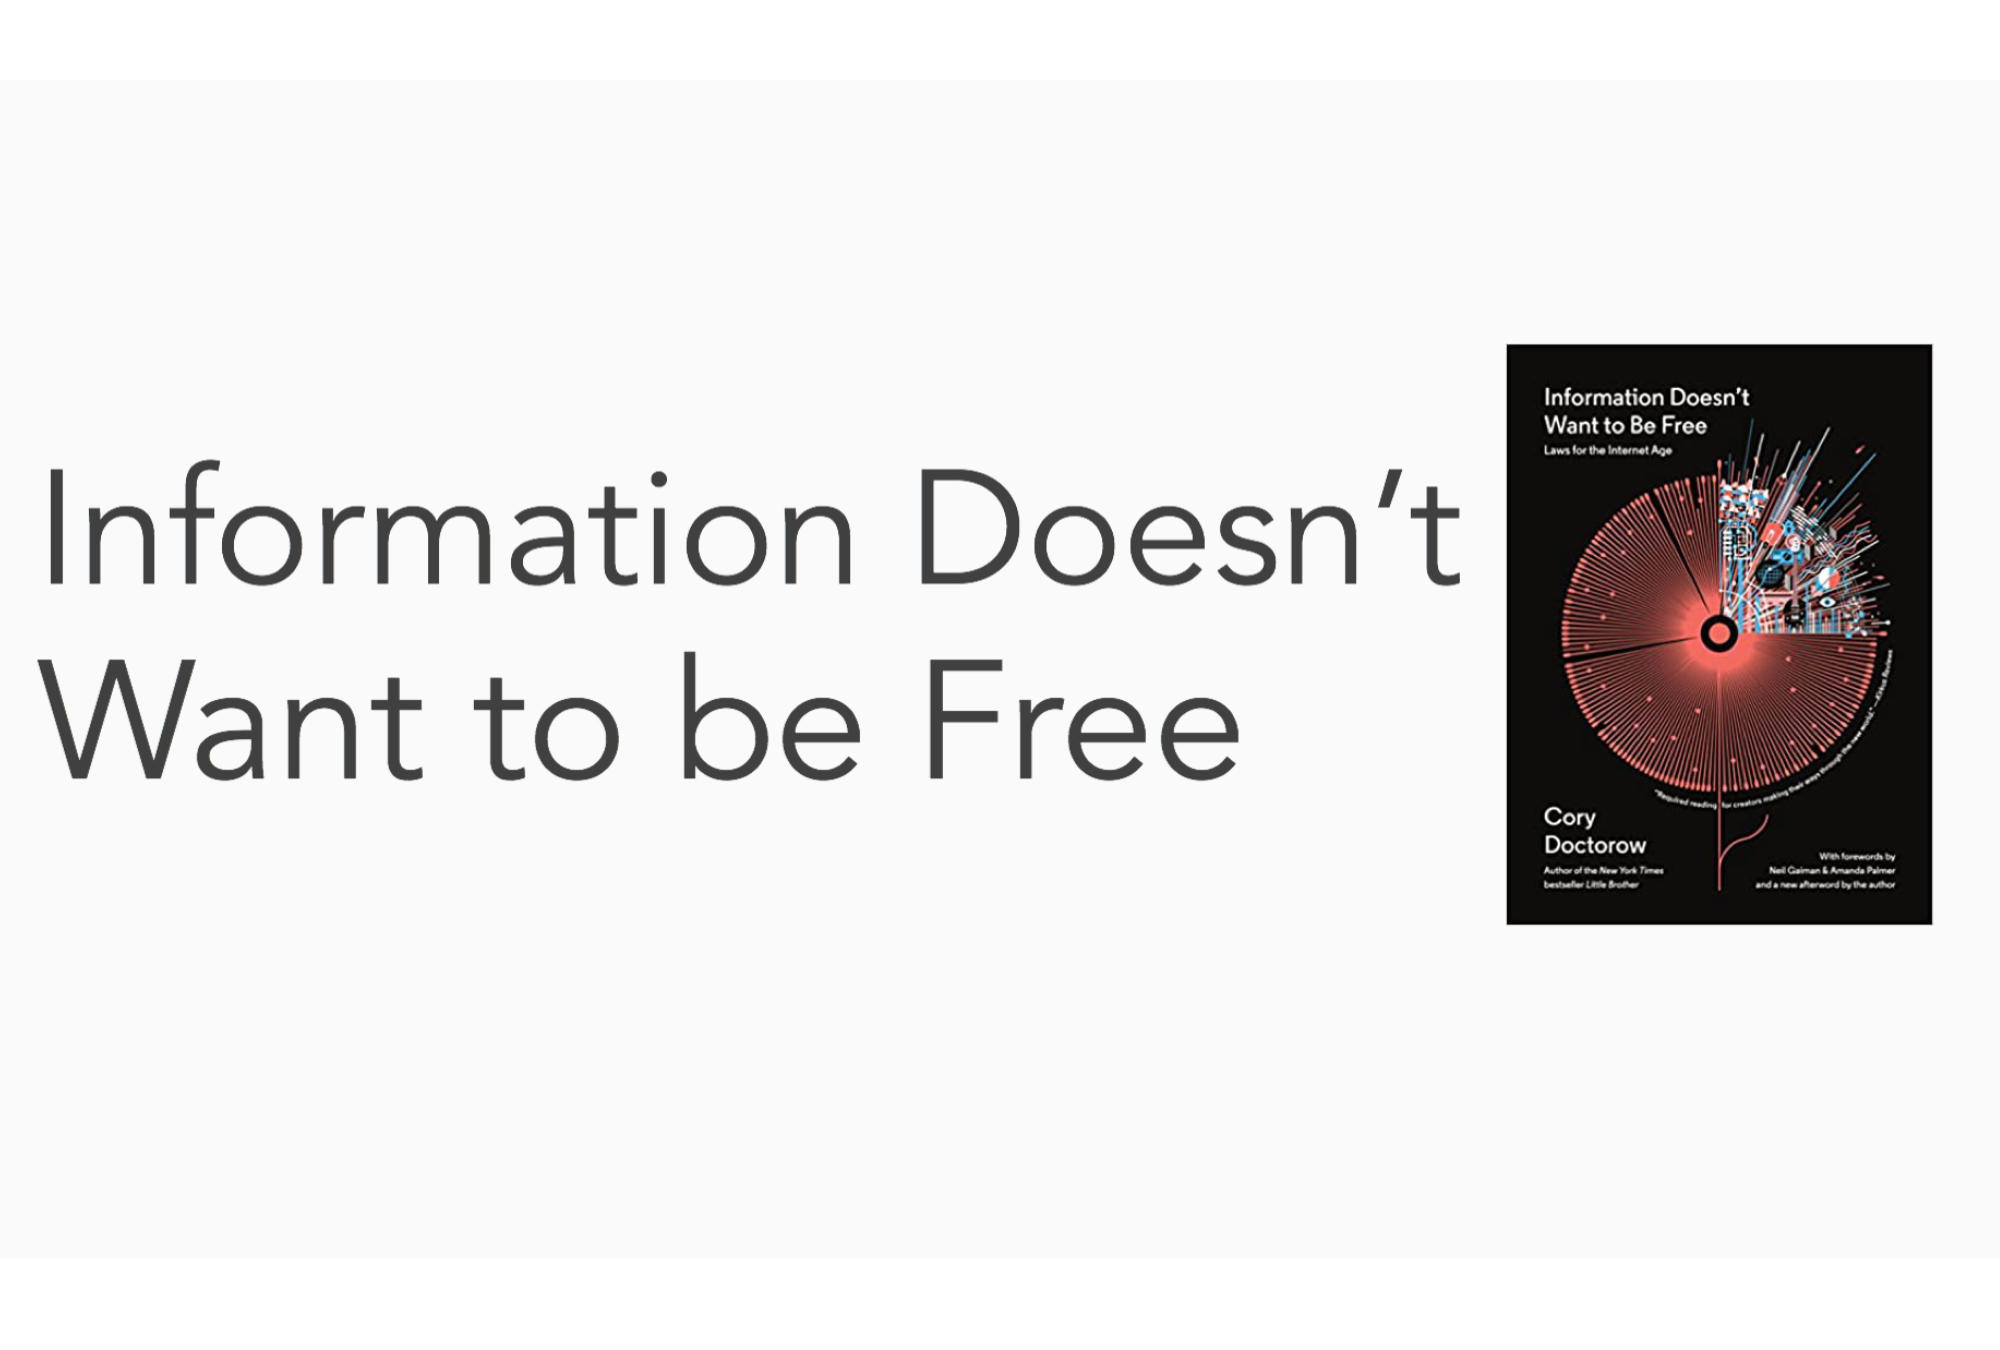 Information Doesn’t Want to Be Free